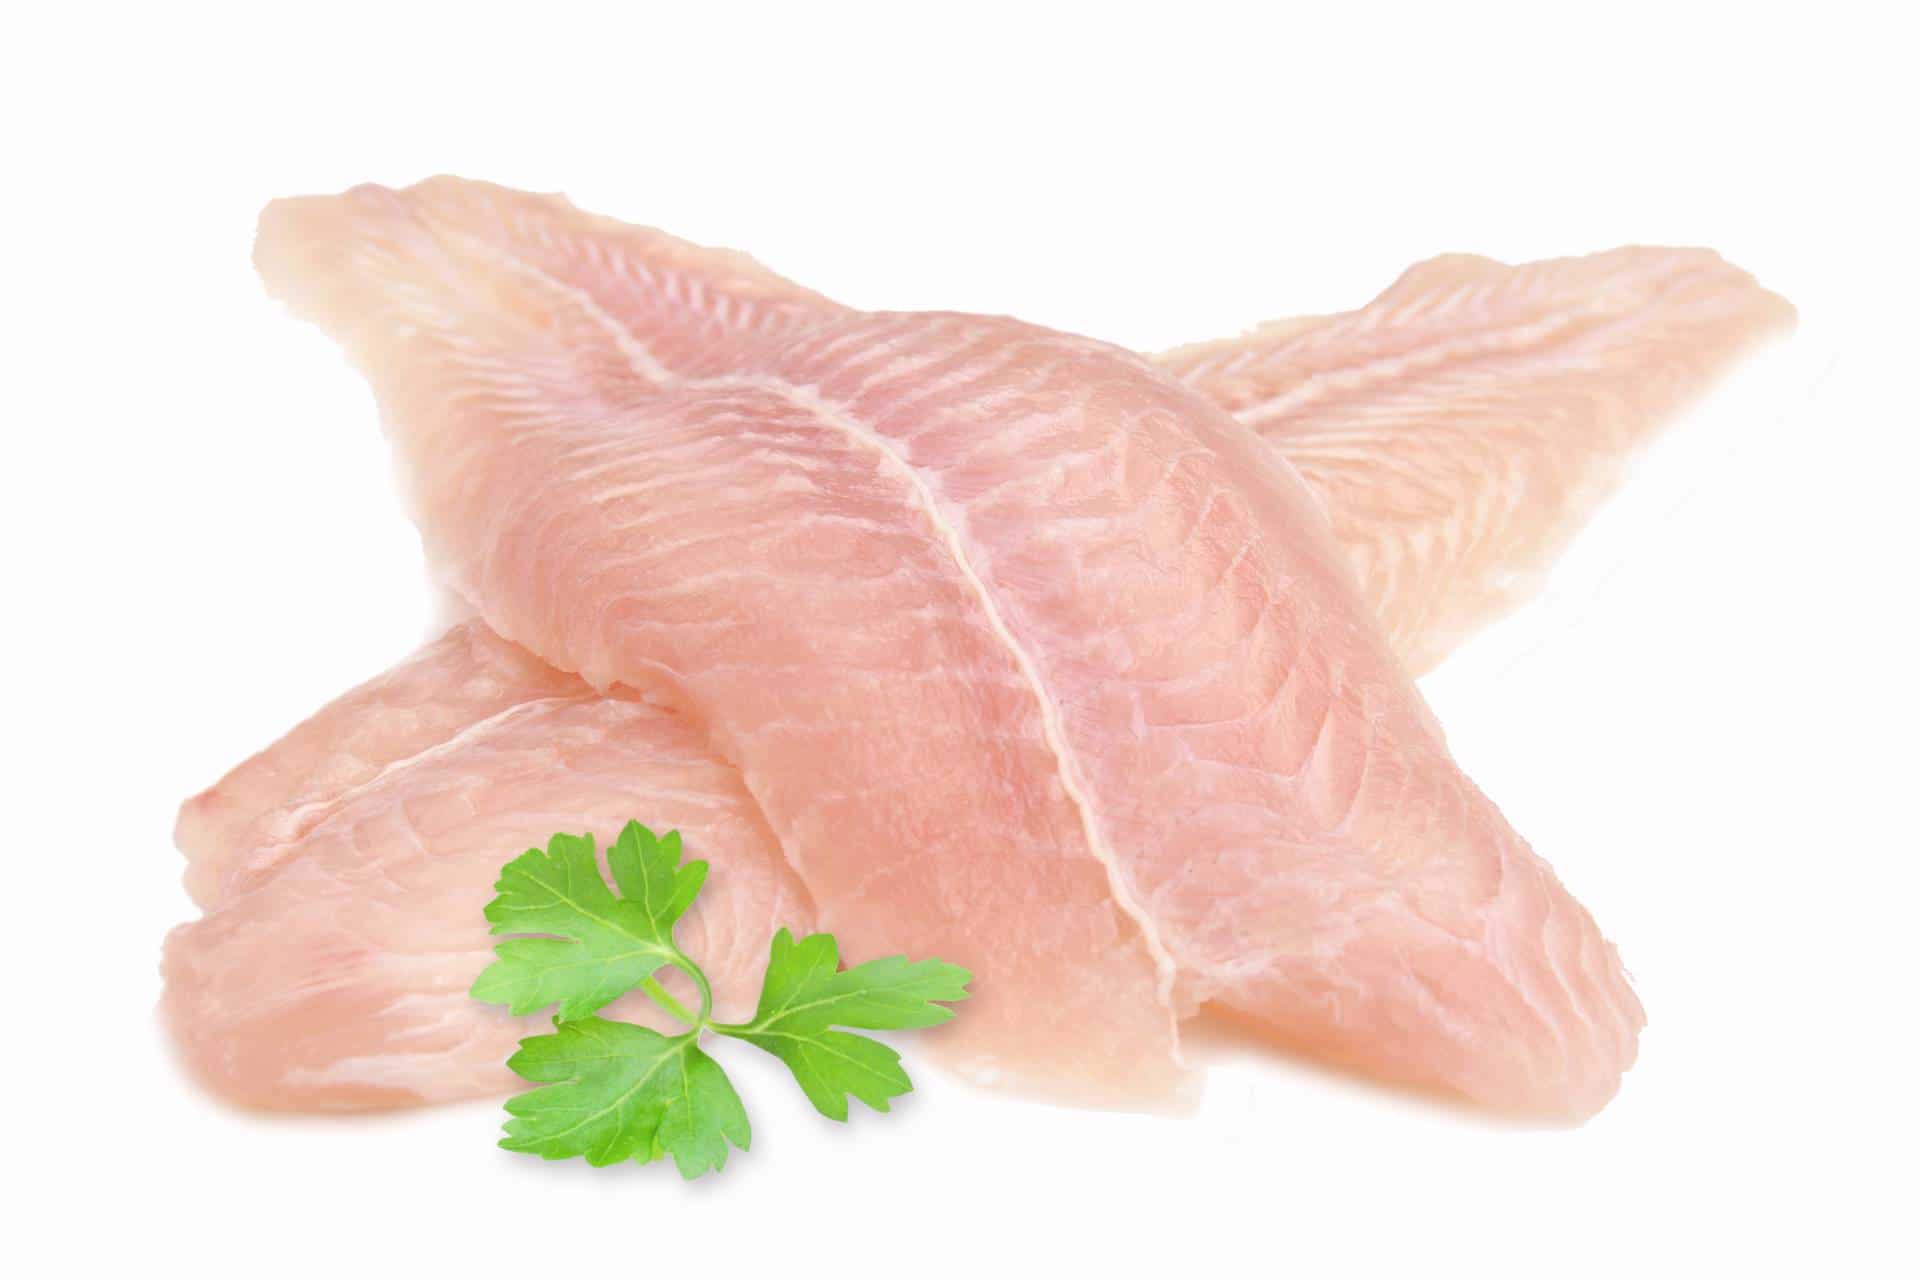 information about pangasius - truths and lies